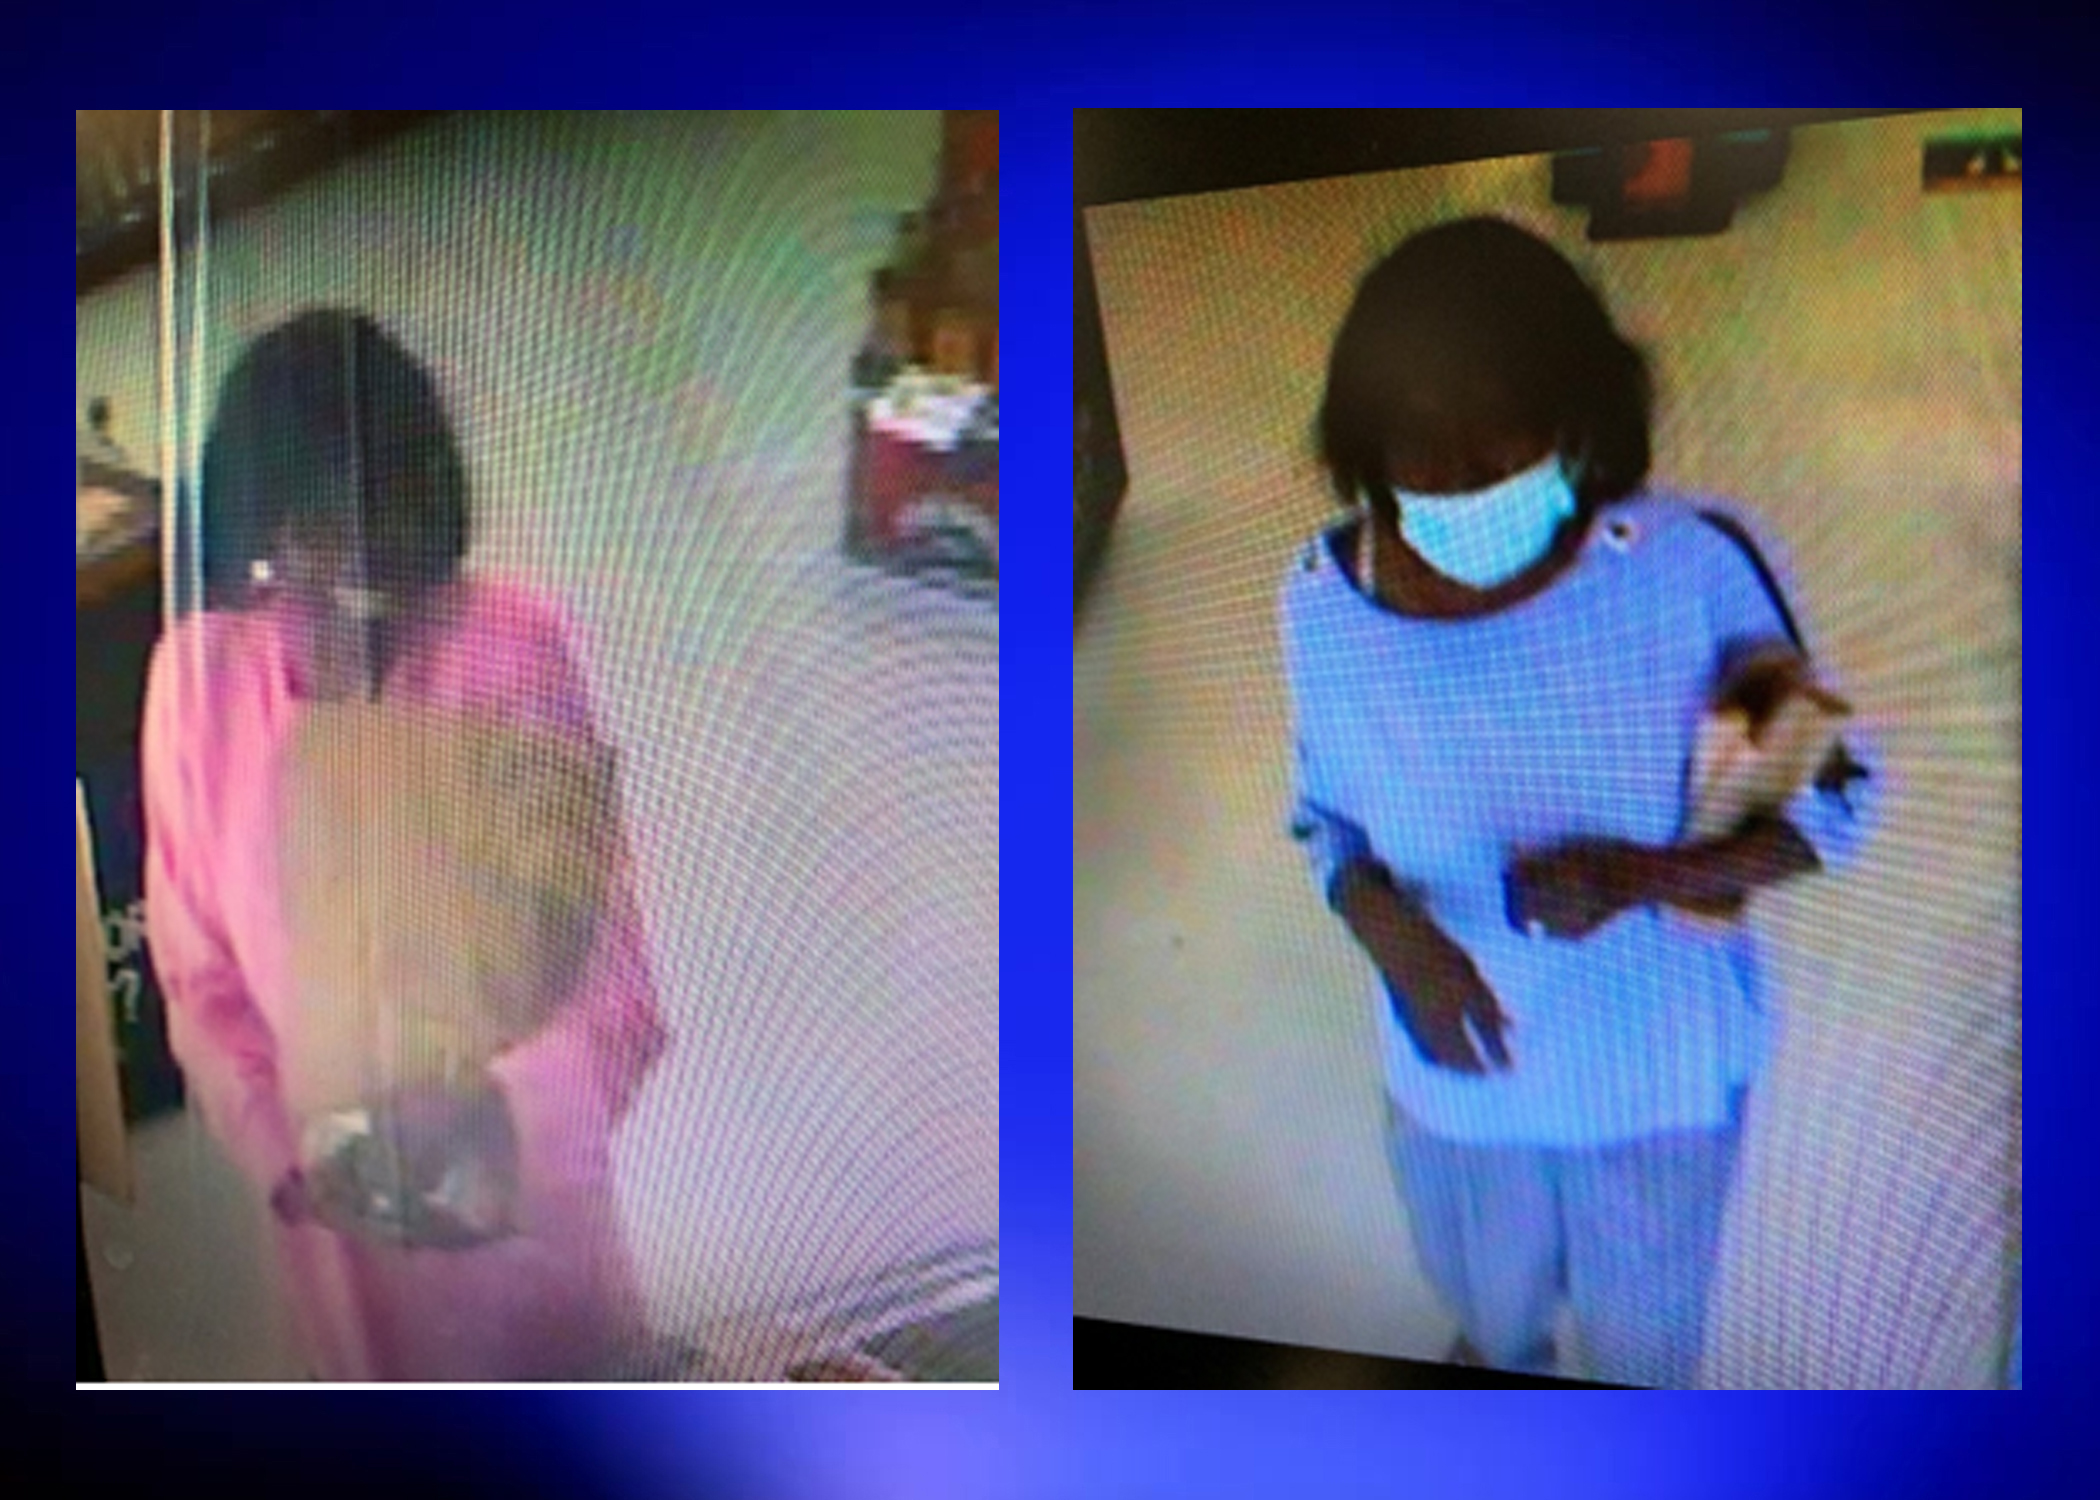 Veterans Affairs police seeking information on person of interest